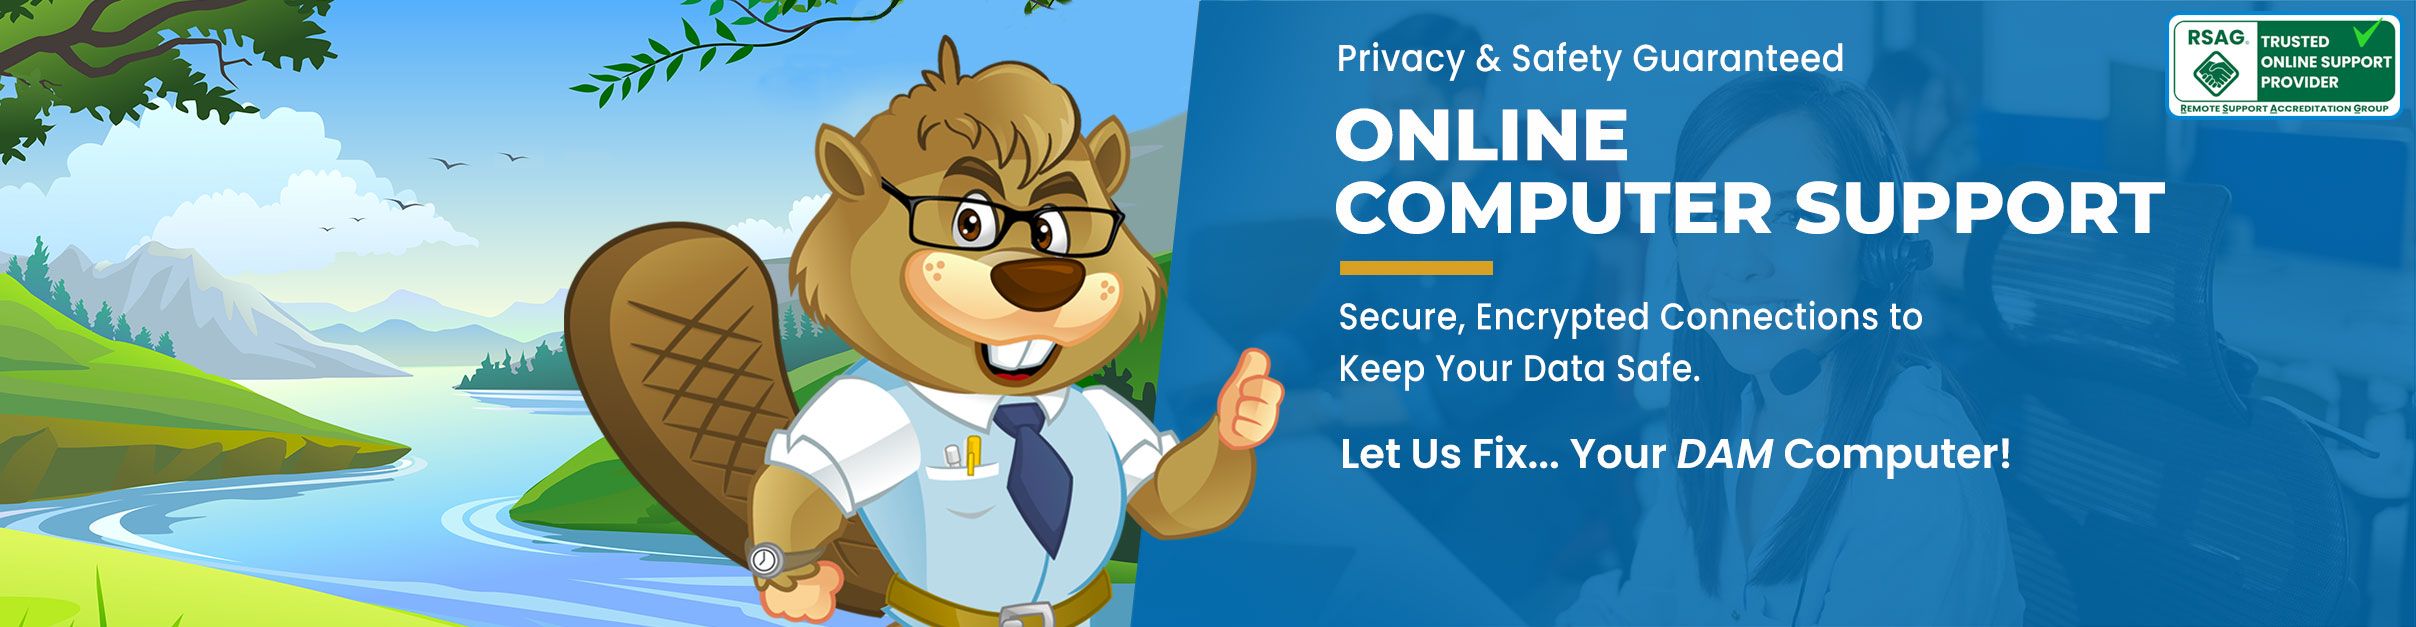 Brainy Beaver Online Computer Support mascot giving thumbs up in front of scenic landscape. Banner offers secure, encrypted online tech support with privacy and safety guaranteed.